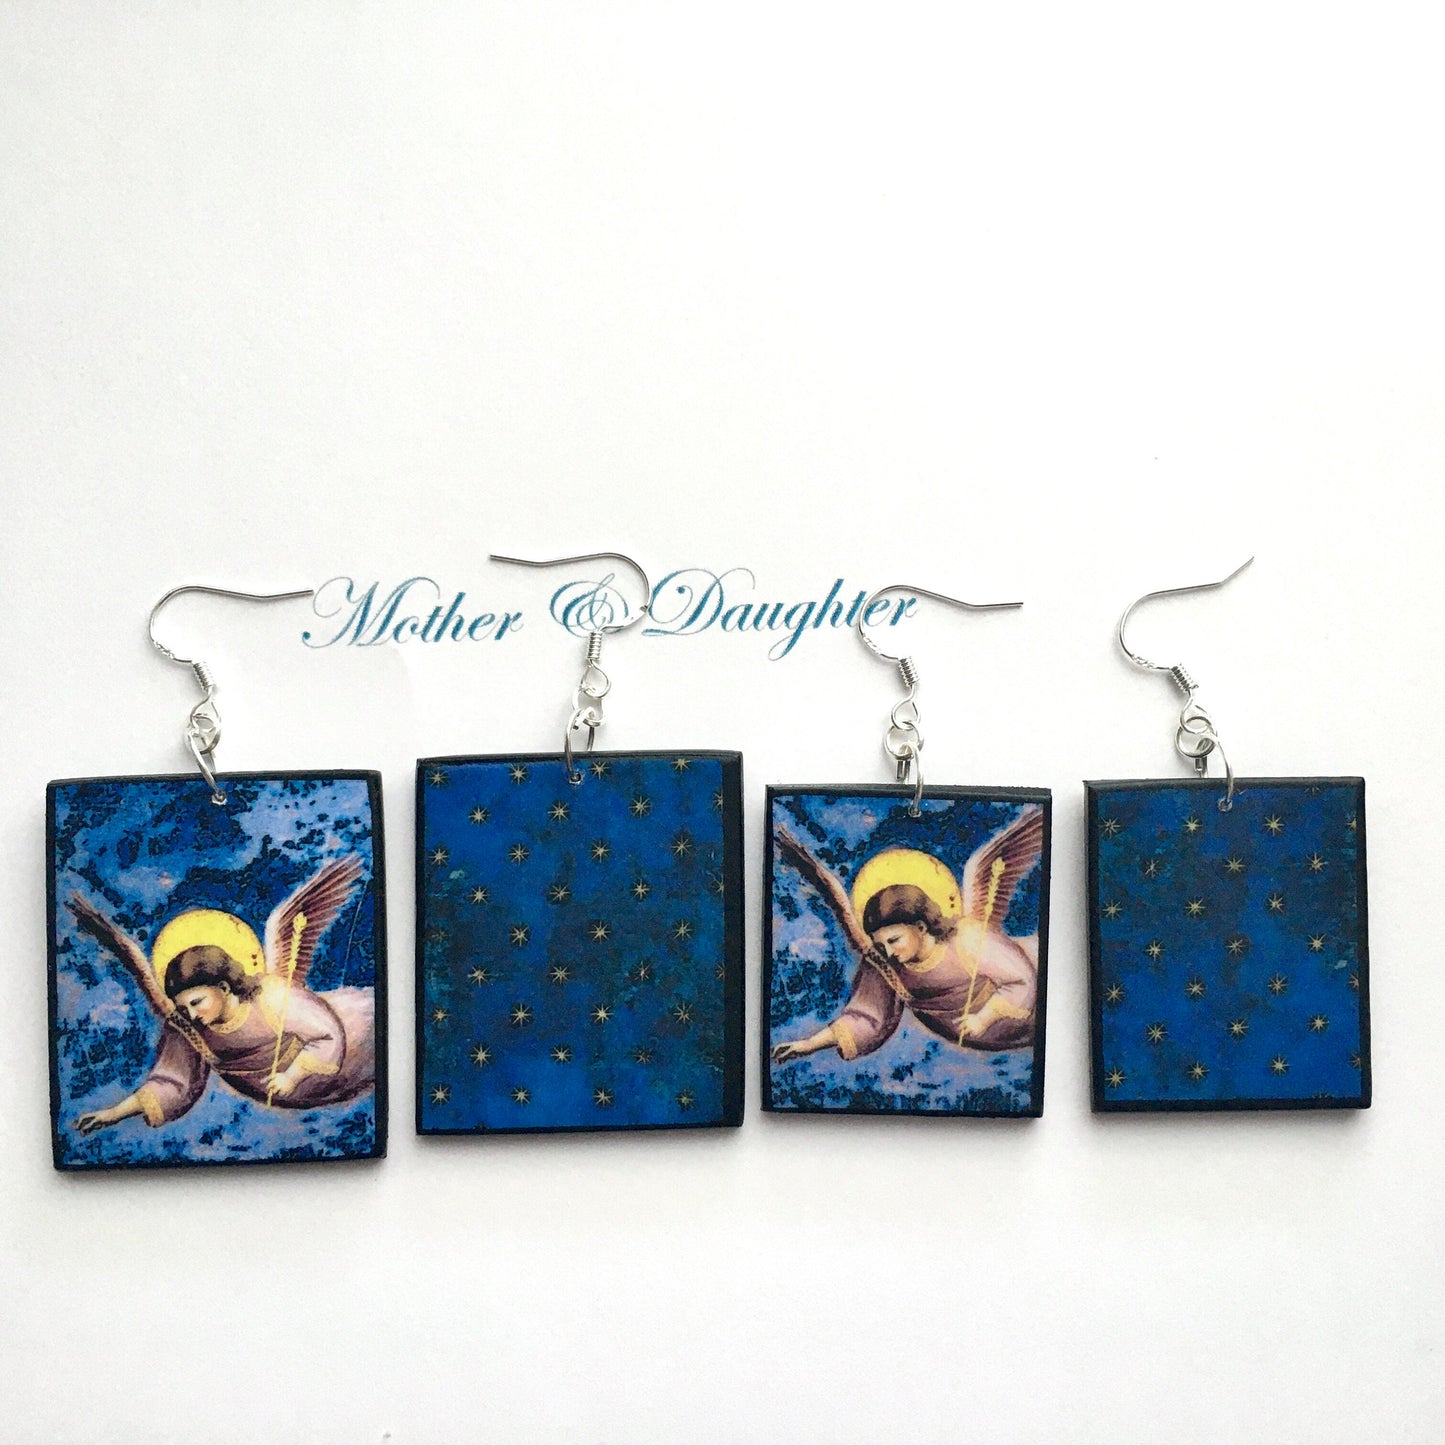 Giotto earrings, set o two pair of different size with art details from Cappella degli Scrovegni.  Mother and daughter sustainable, artsy gift. Lightweight earrings on sustainable wood and sterling silver hooks earrings with a lapislaz starry sky and an angel.